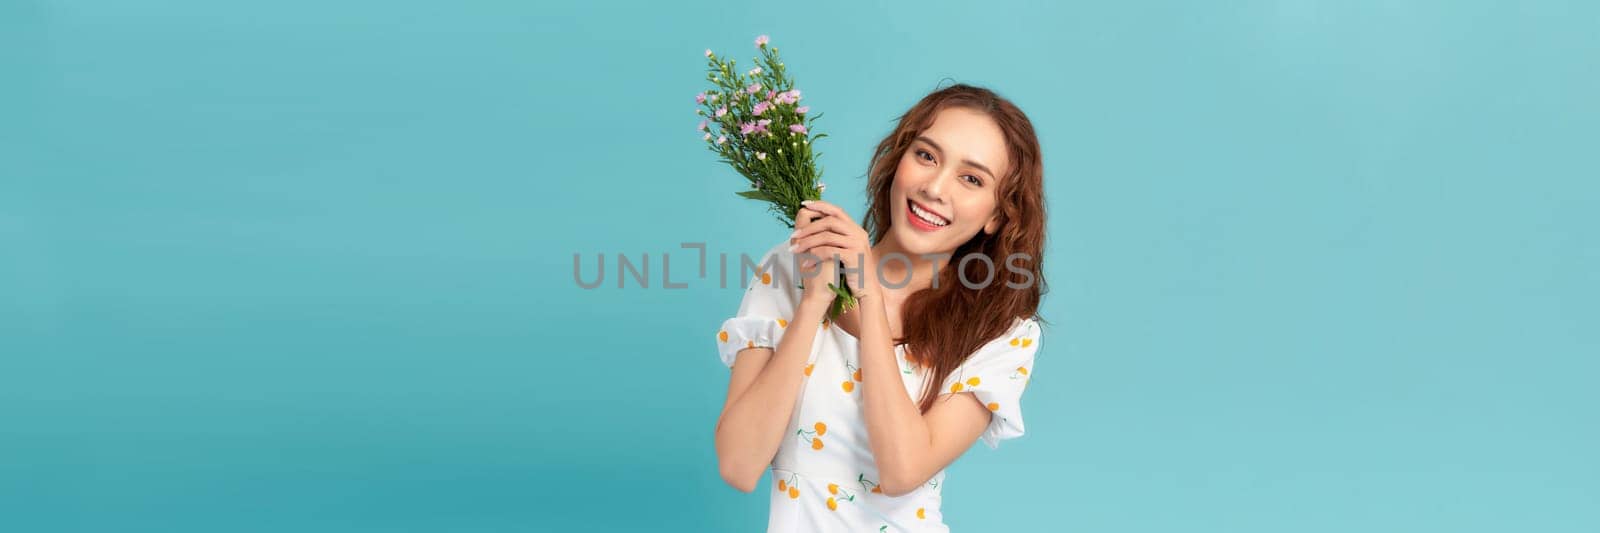 Young beautiful girl with long hair and hat posing with a bouquet of wildflowers.  by makidotvn